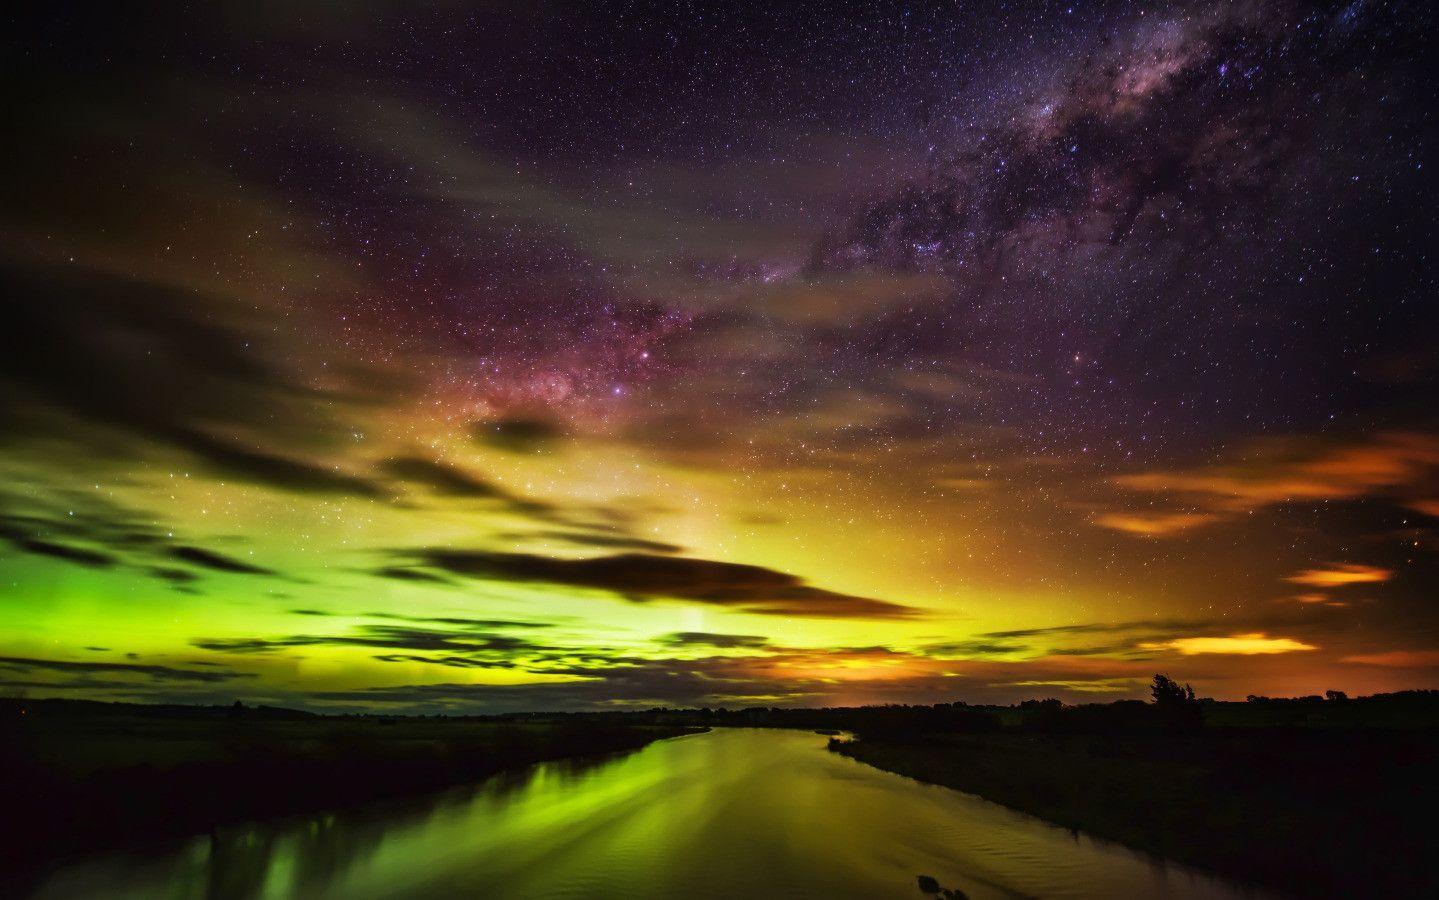 The Southern Lights in New Zealand widescreen wallpaper. Wide